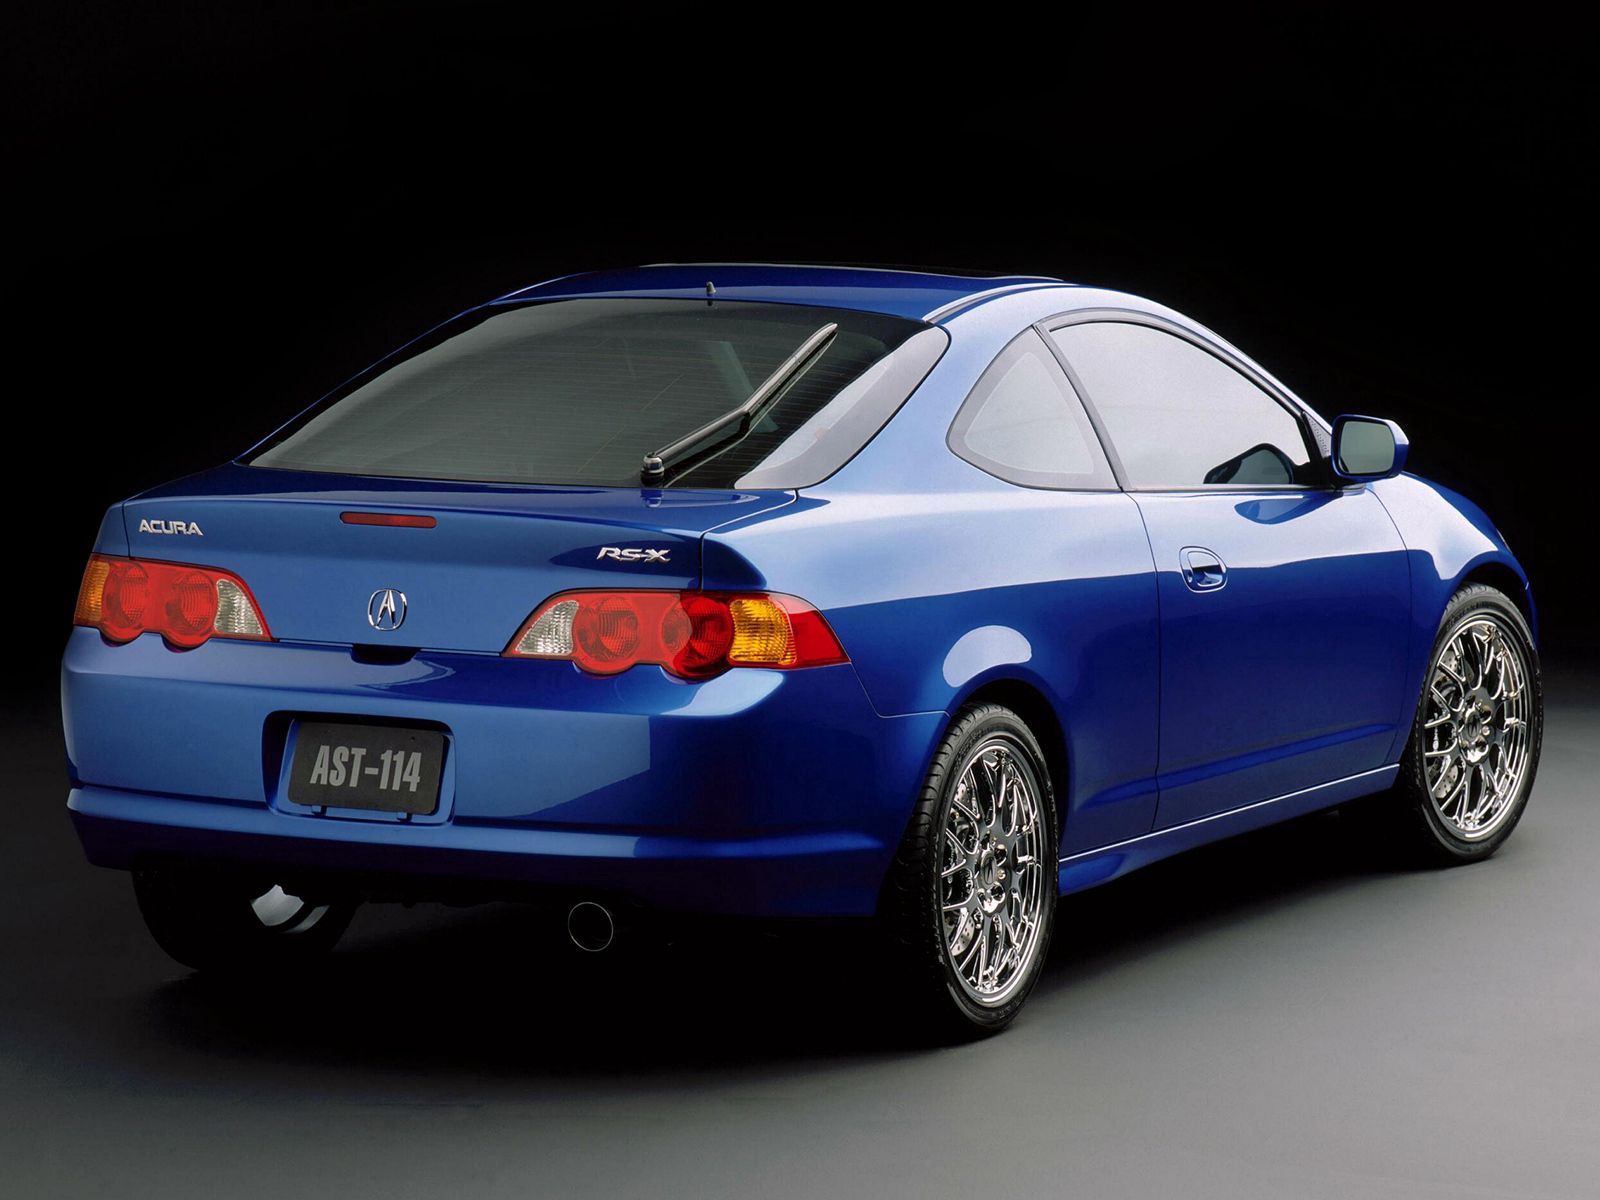 akura, auto, acura, cars, blue, concept, back view, rear view, style, concept car, 2001, rs x